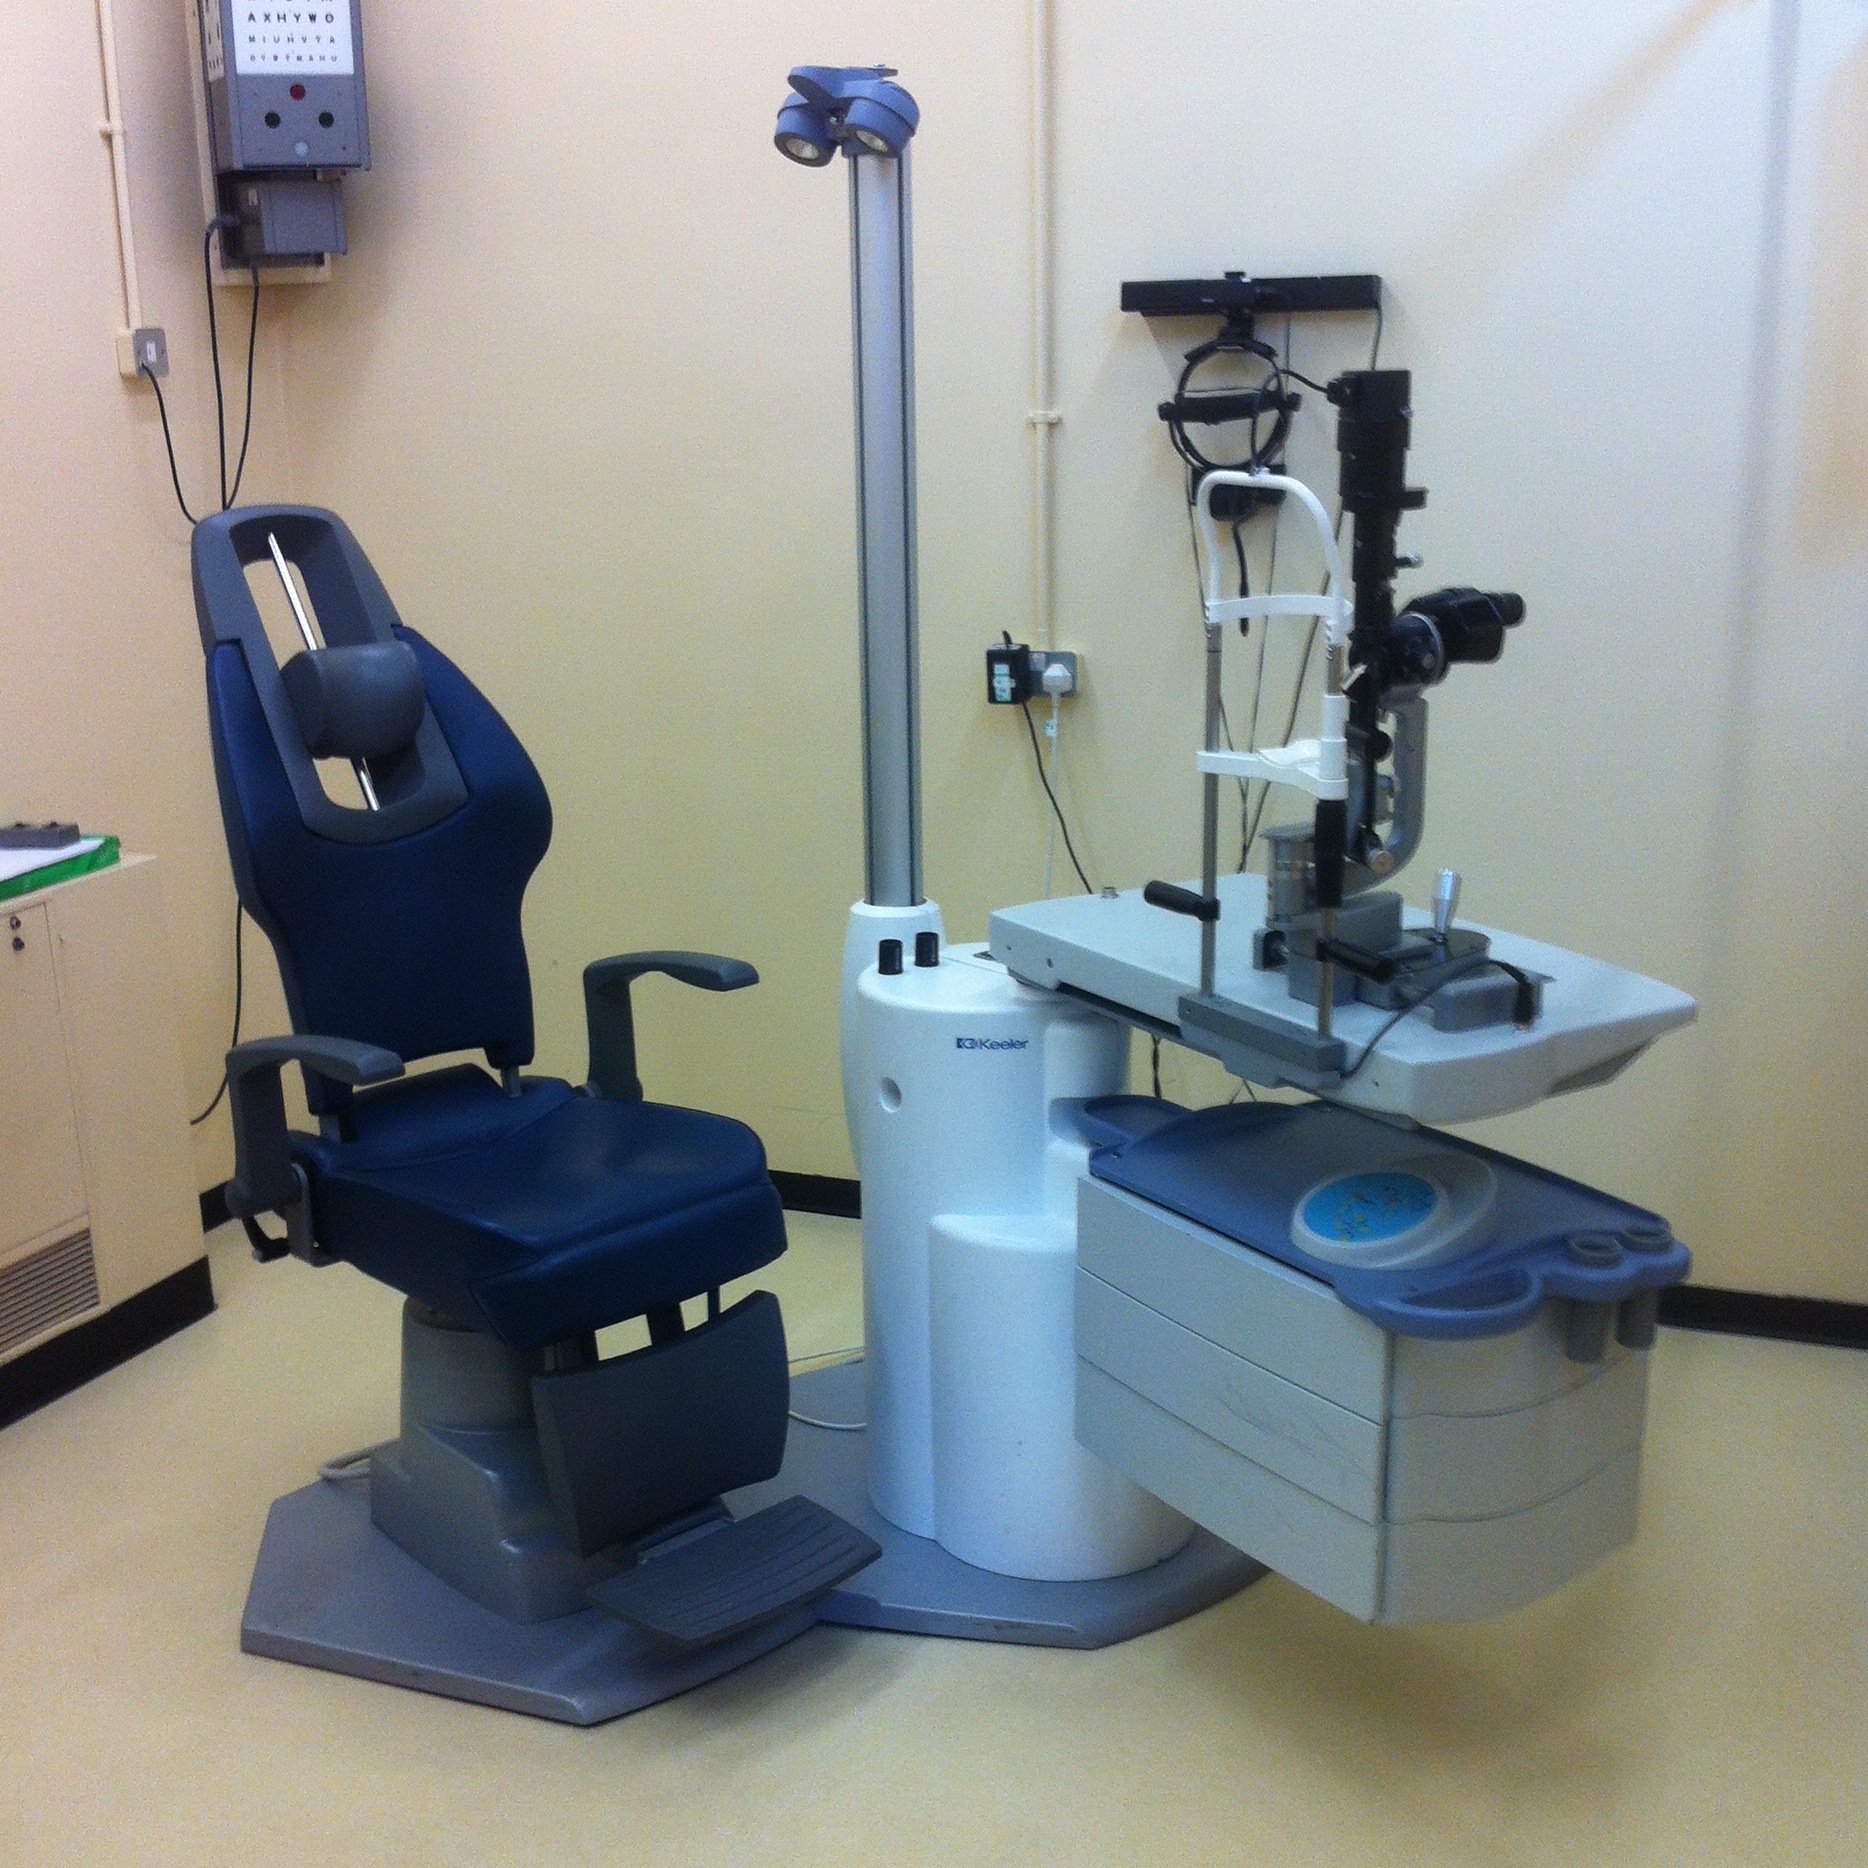 Keeler Compact Refraction Unit With Deluxe Chair Reconditioned